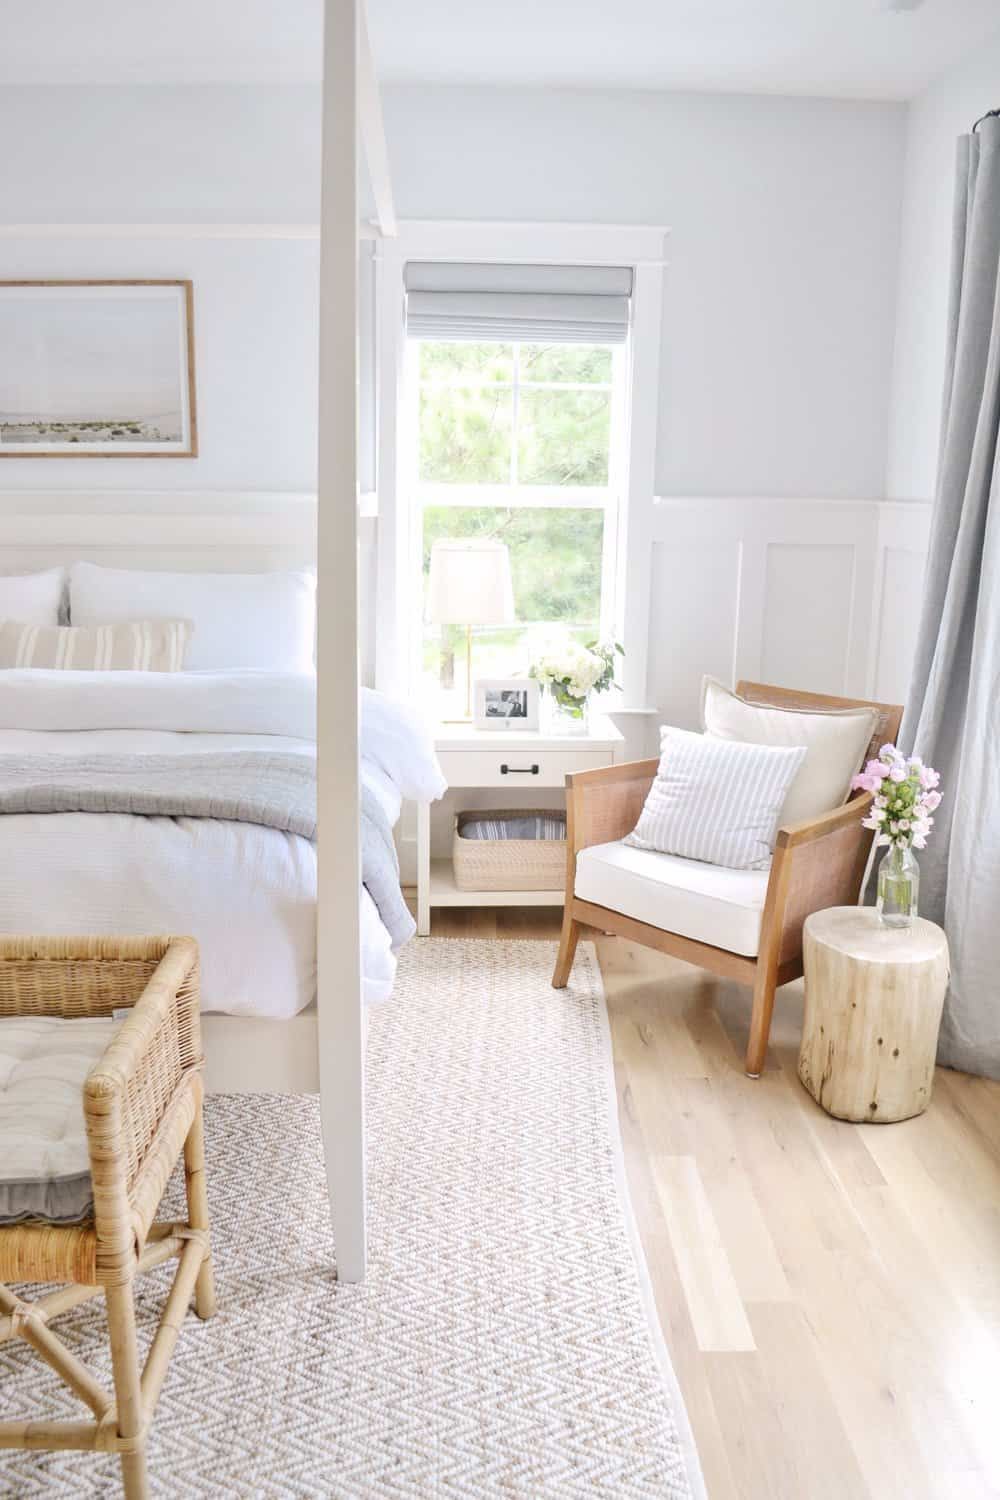 A Relaxing Master Bedroom - Chrissy Marie Blog